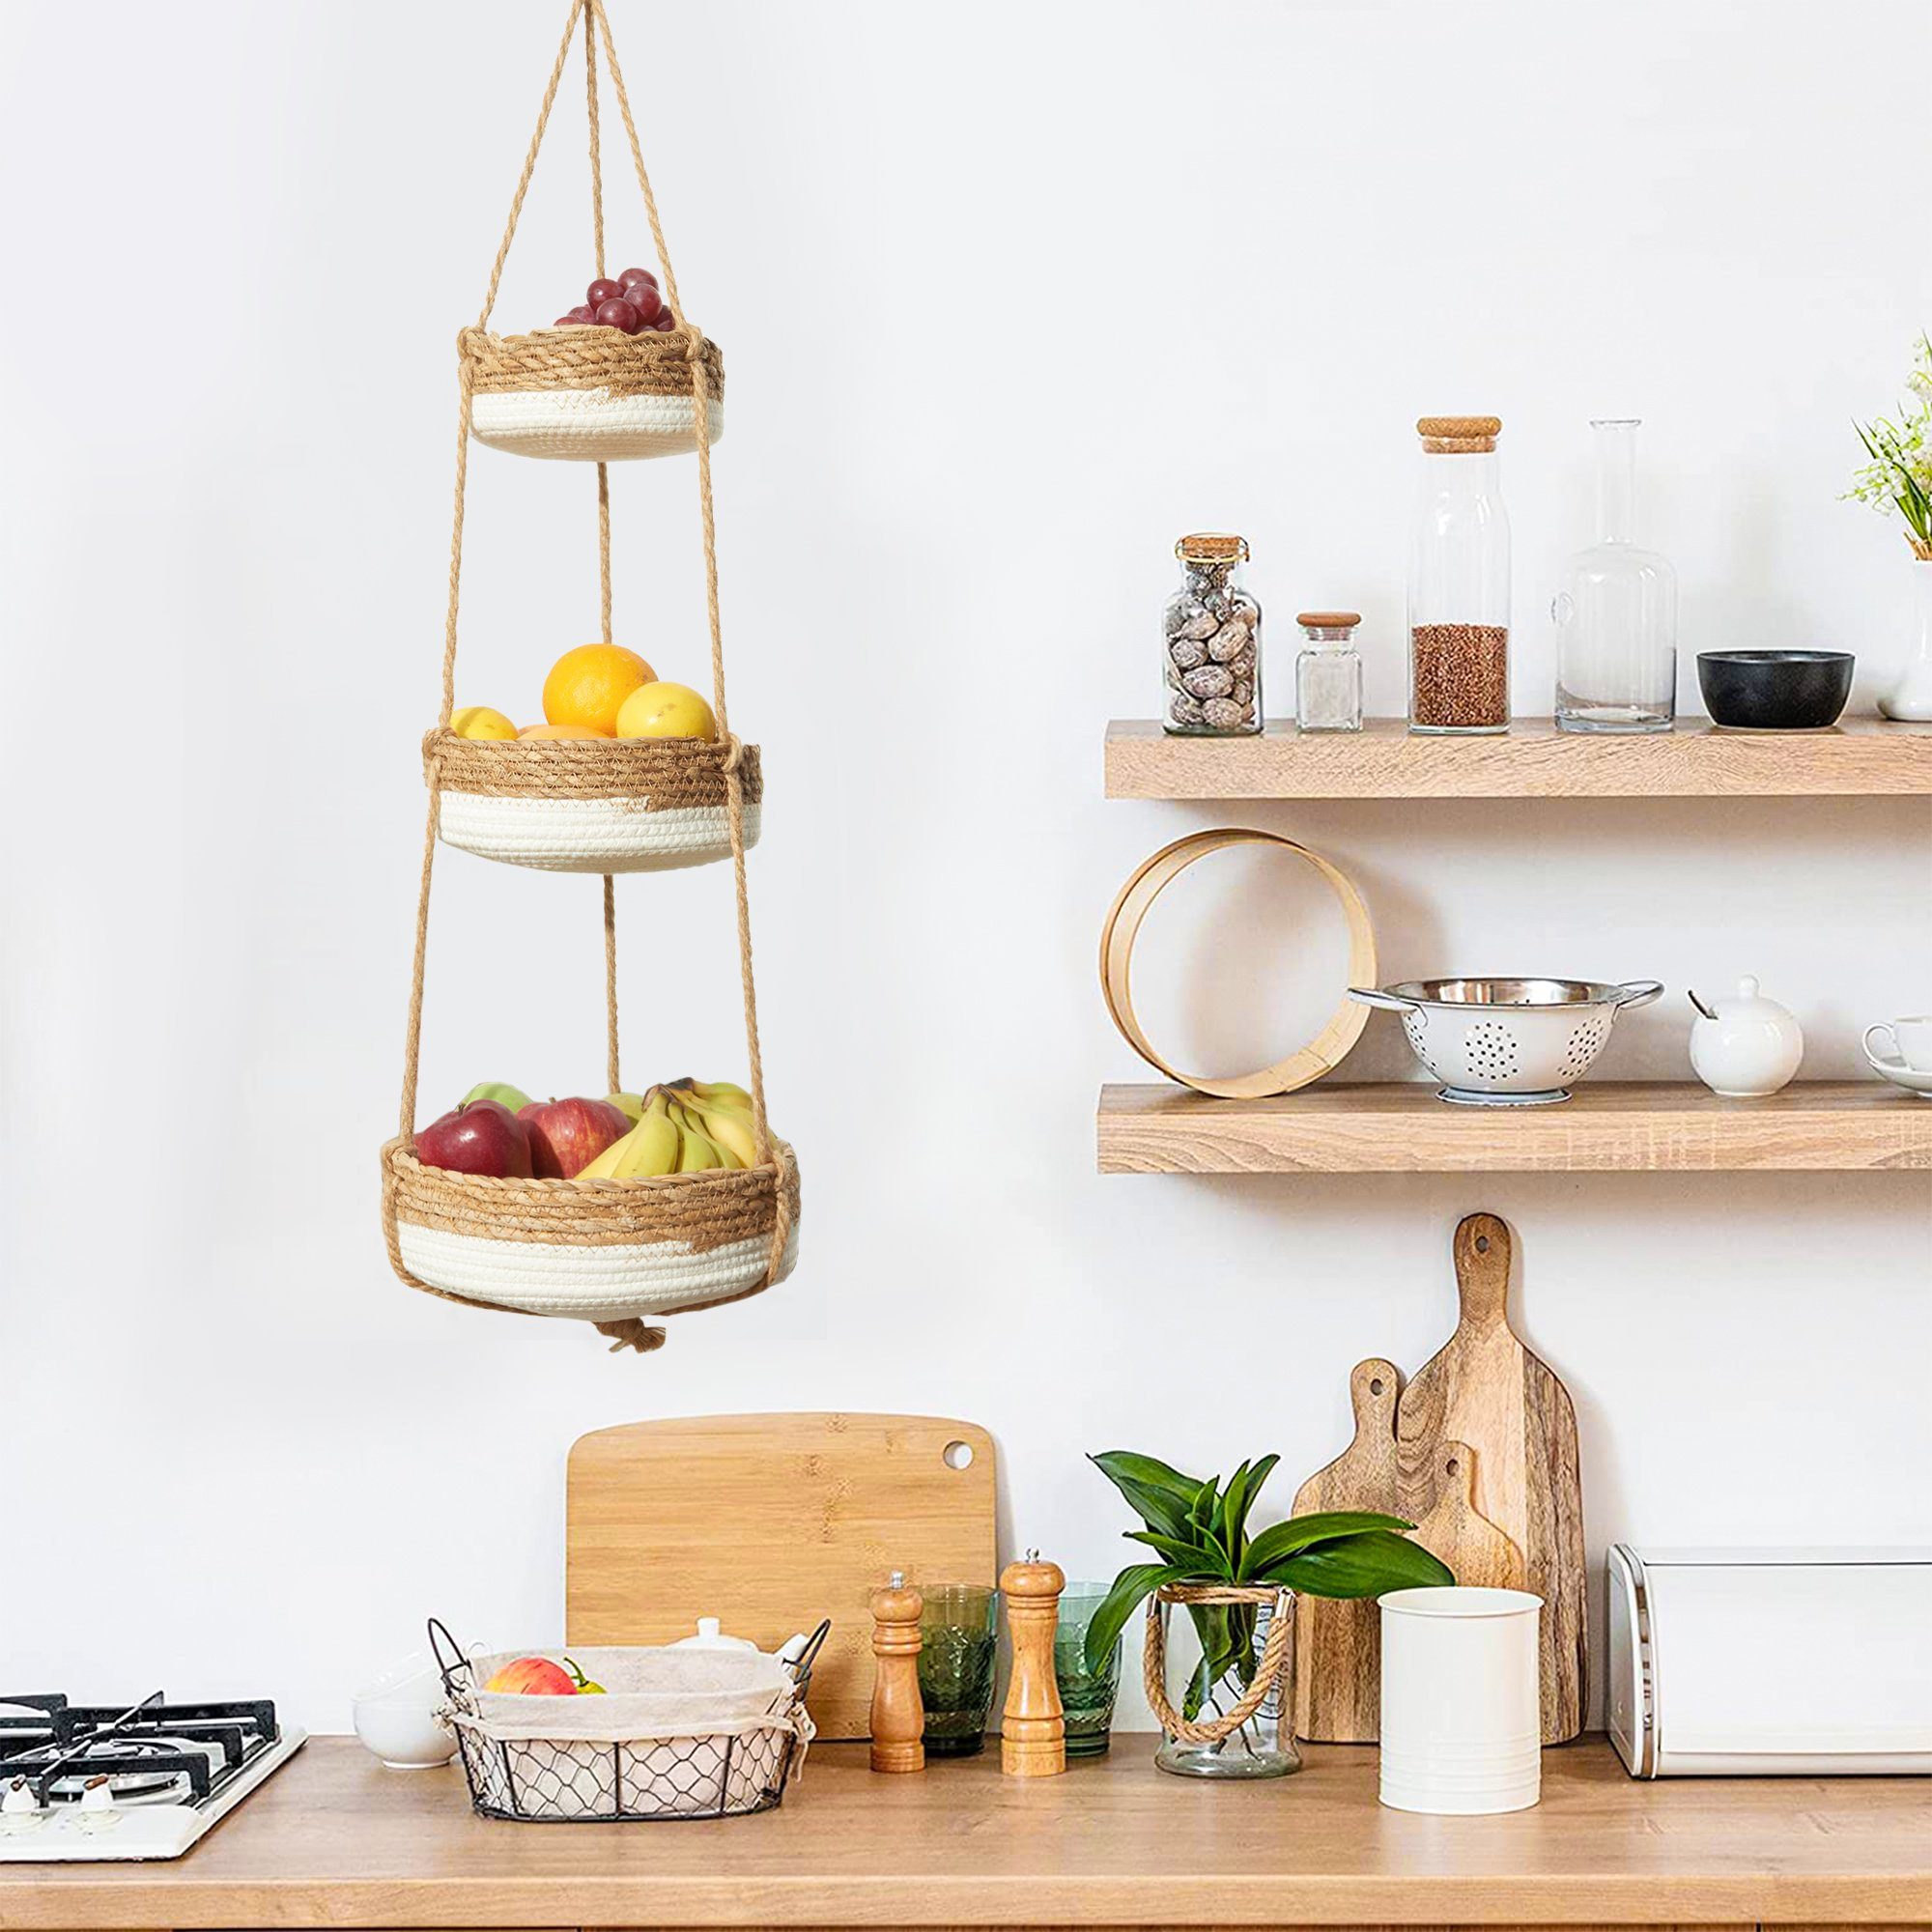 https://www.tasteofhome.com/wp-content/uploads/2022/02/a-hanging-fruit-basket-is-the-space-saving-kitchen-item-you-didnt-know-you-needed-ecomm-ft-via-walmart.com_.jpeg